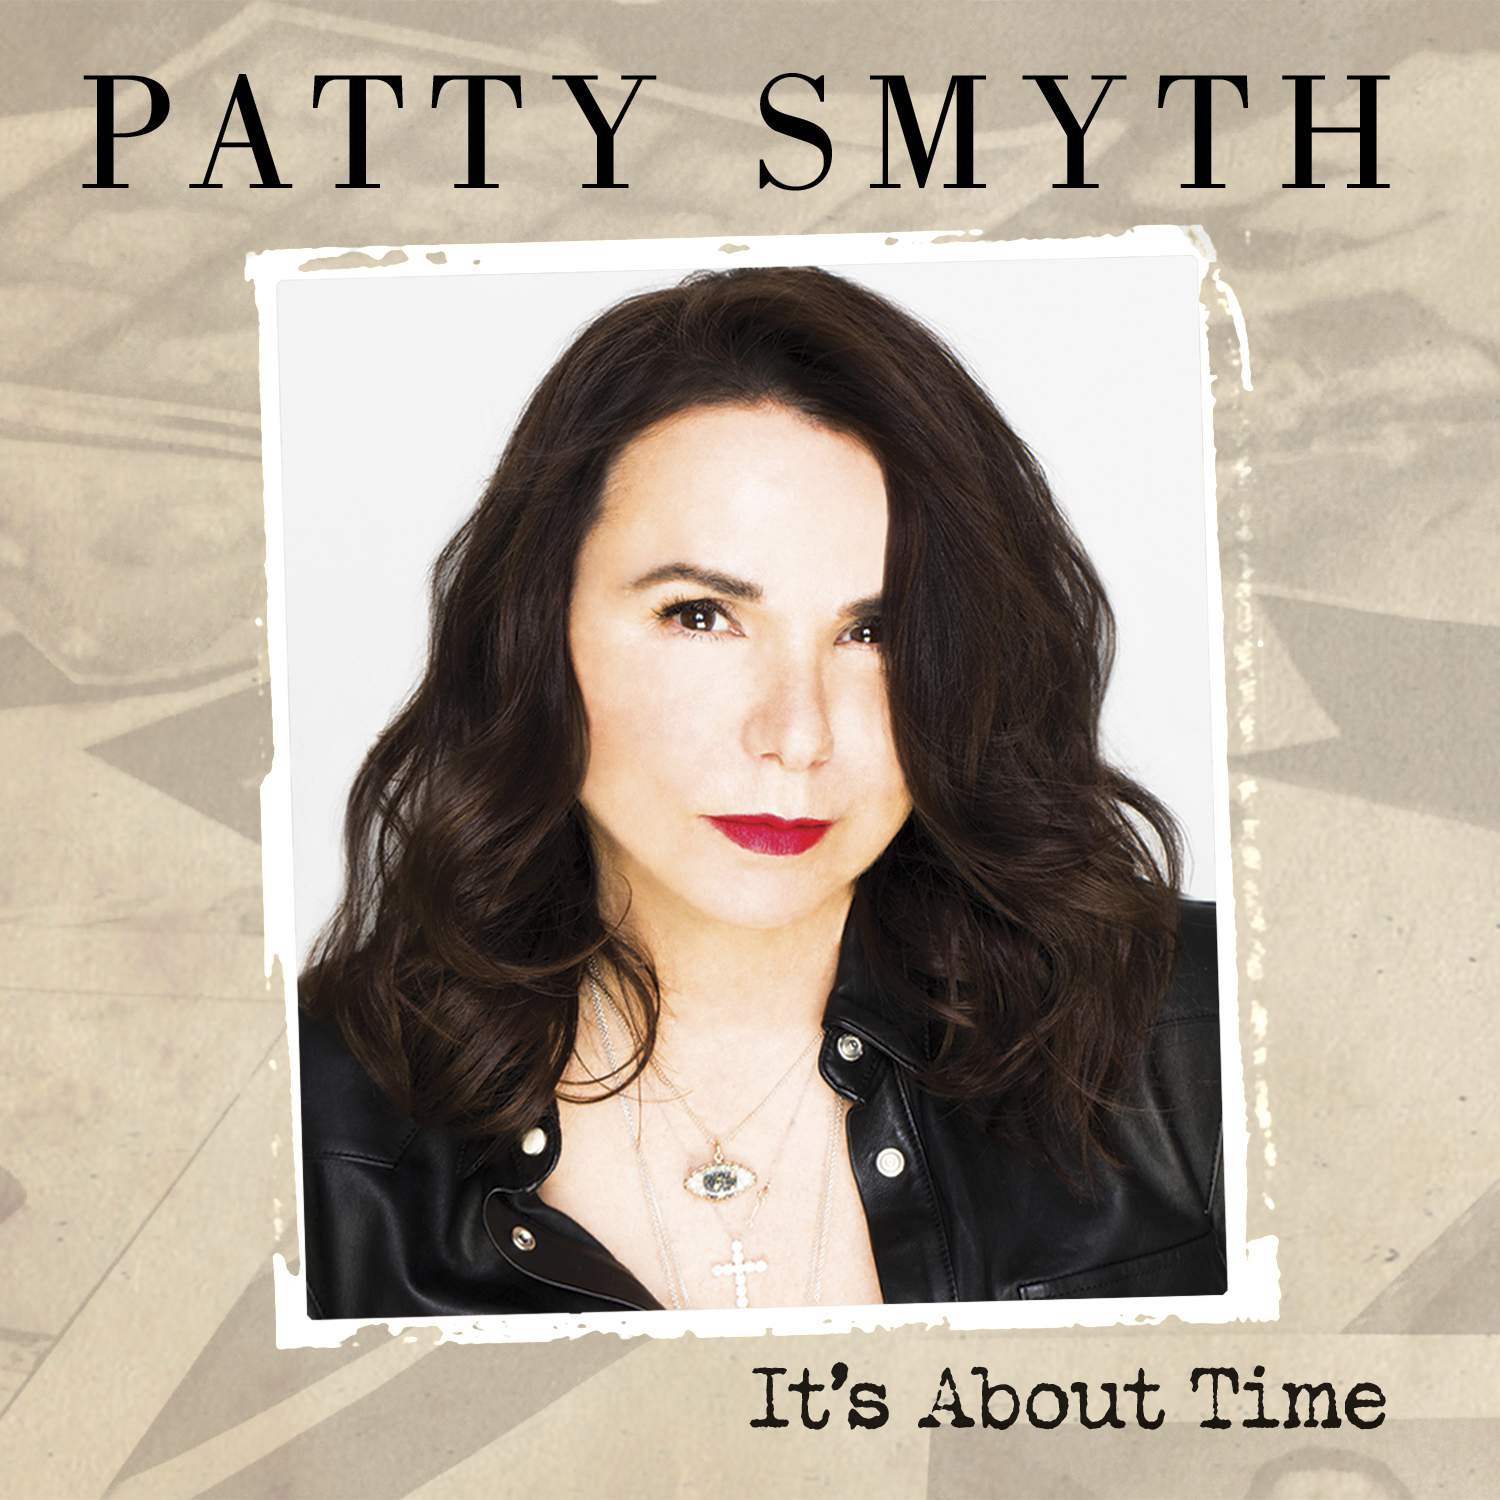 New this week: Patty Smyth, 'The Right Stuff' and 'Time'